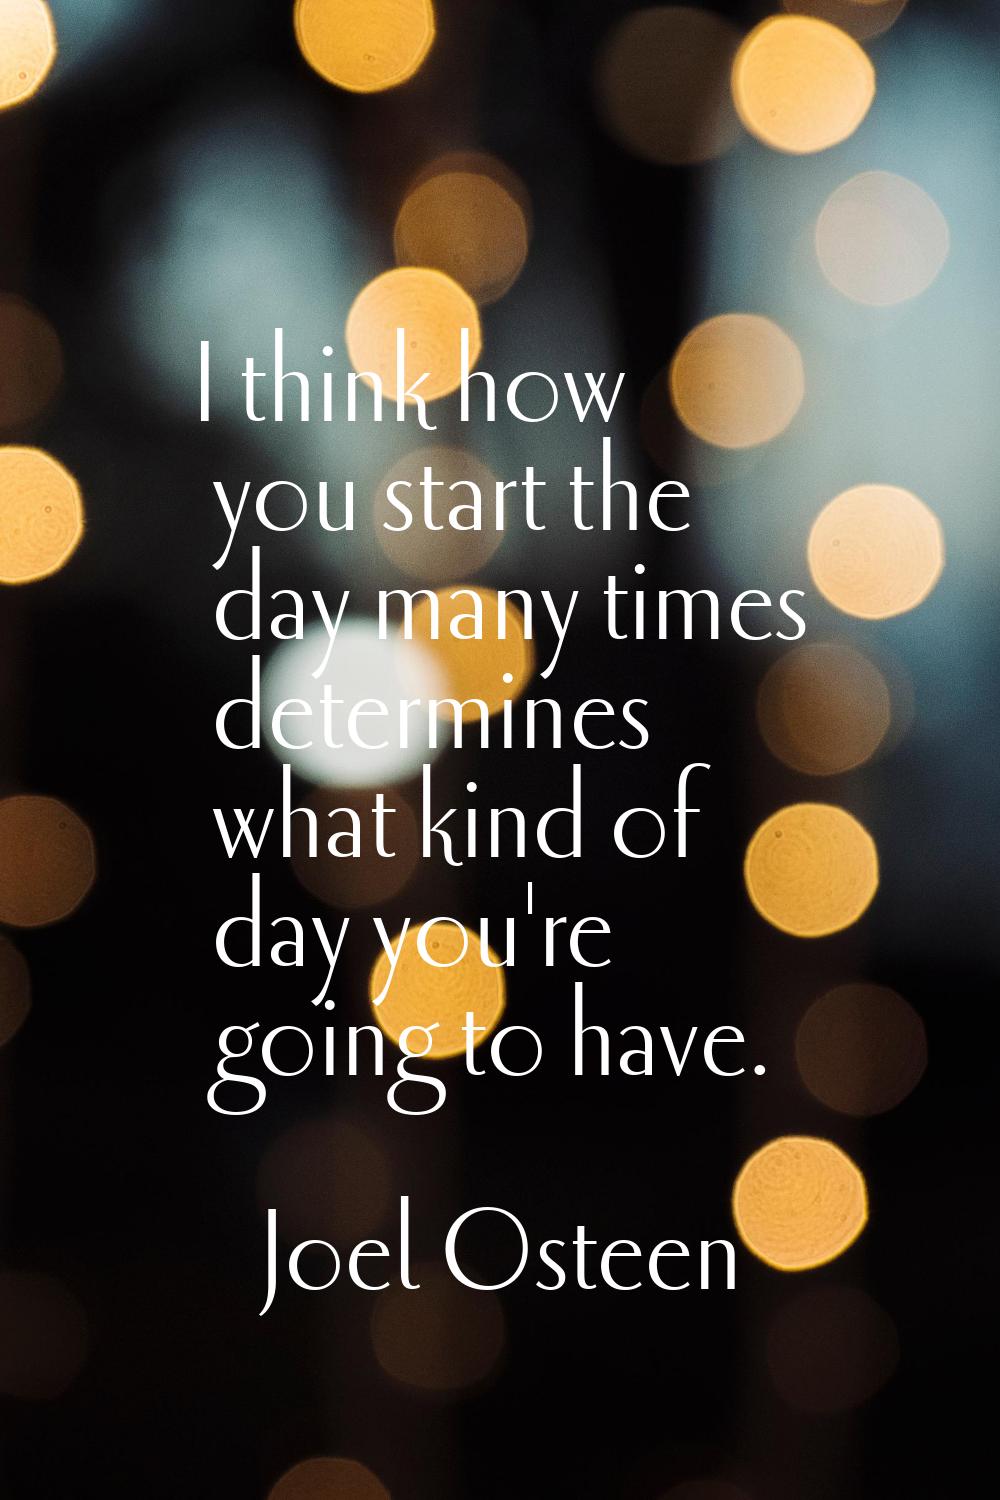 I think how you start the day many times determines what kind of day you're going to have.